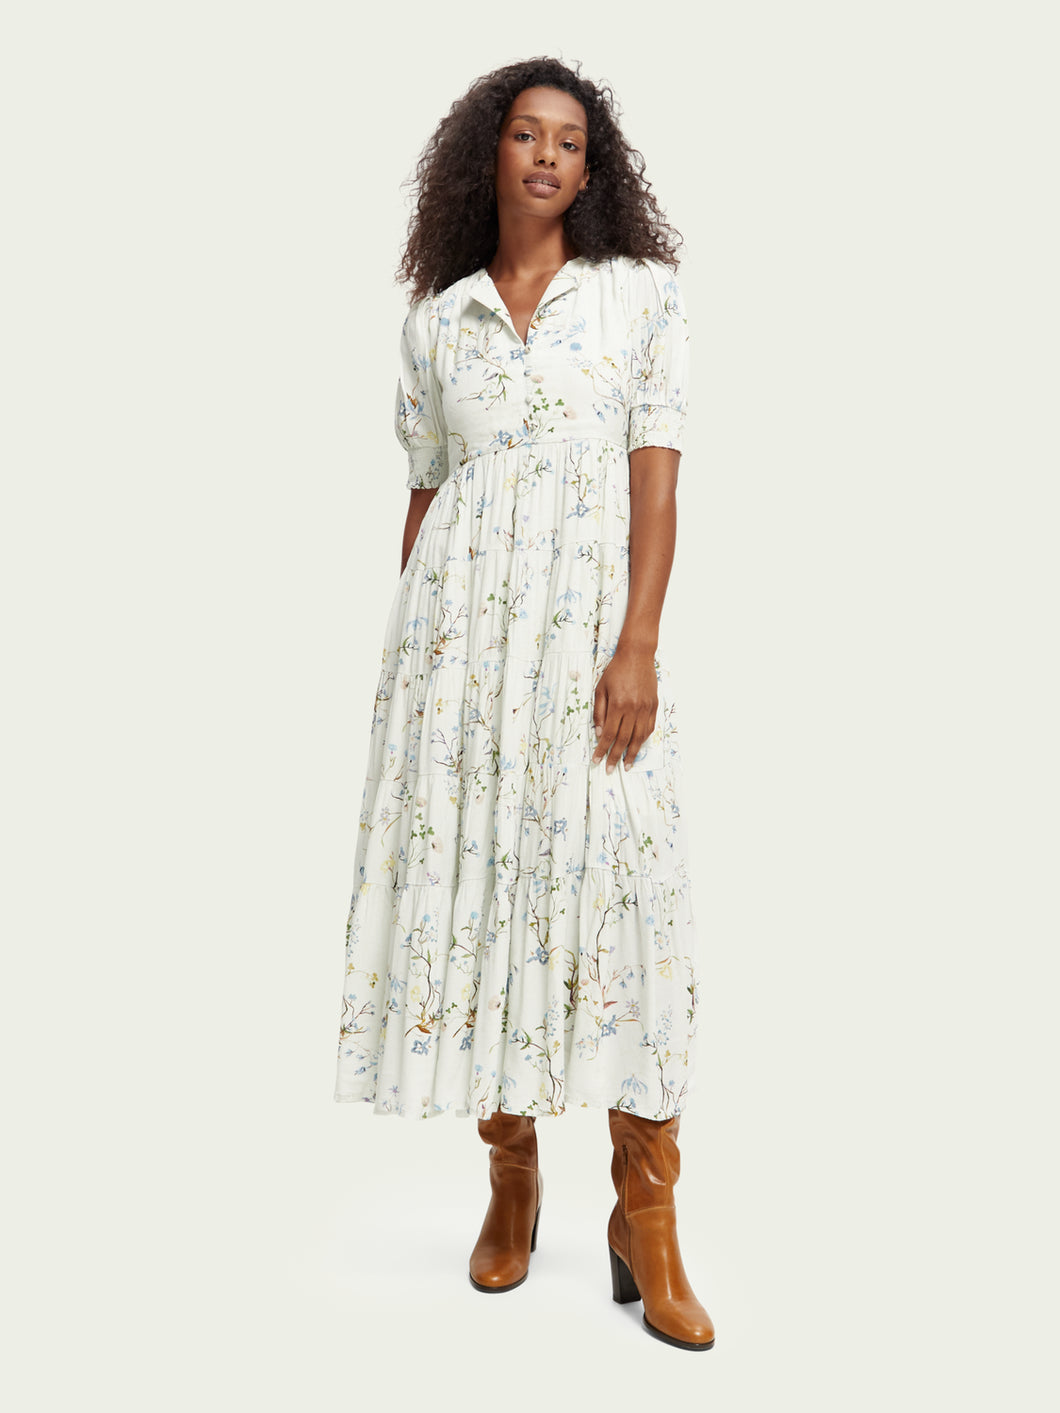 Scotch & Soda S/S Tiered Maxi Dress in White Floral - FINAL SALE